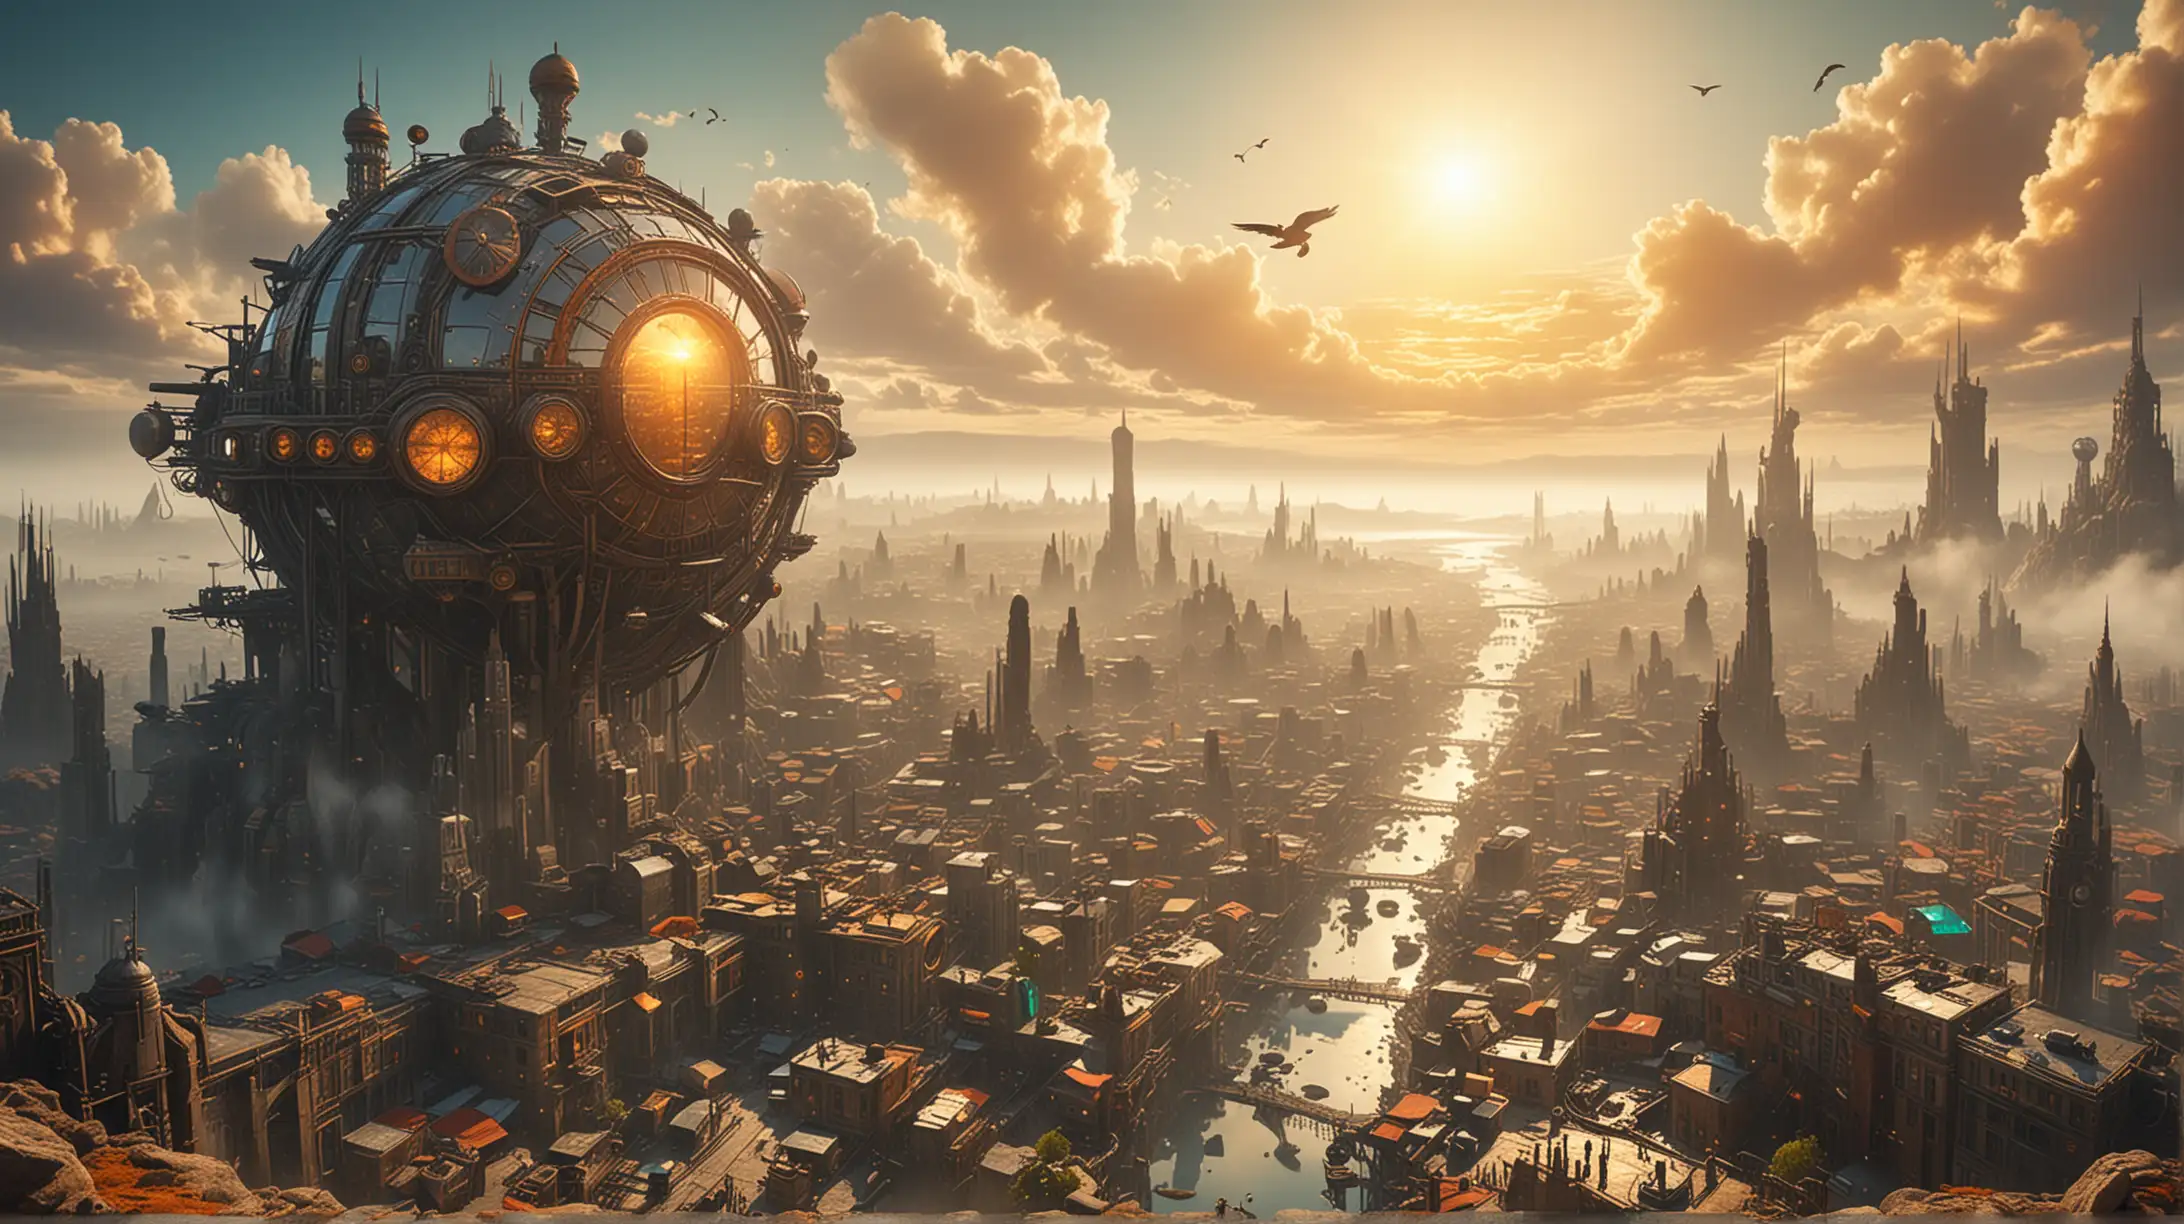 a steampunk city made of stone, glass and stell on another planet, big sun, fog, bright colors, bird's eye view